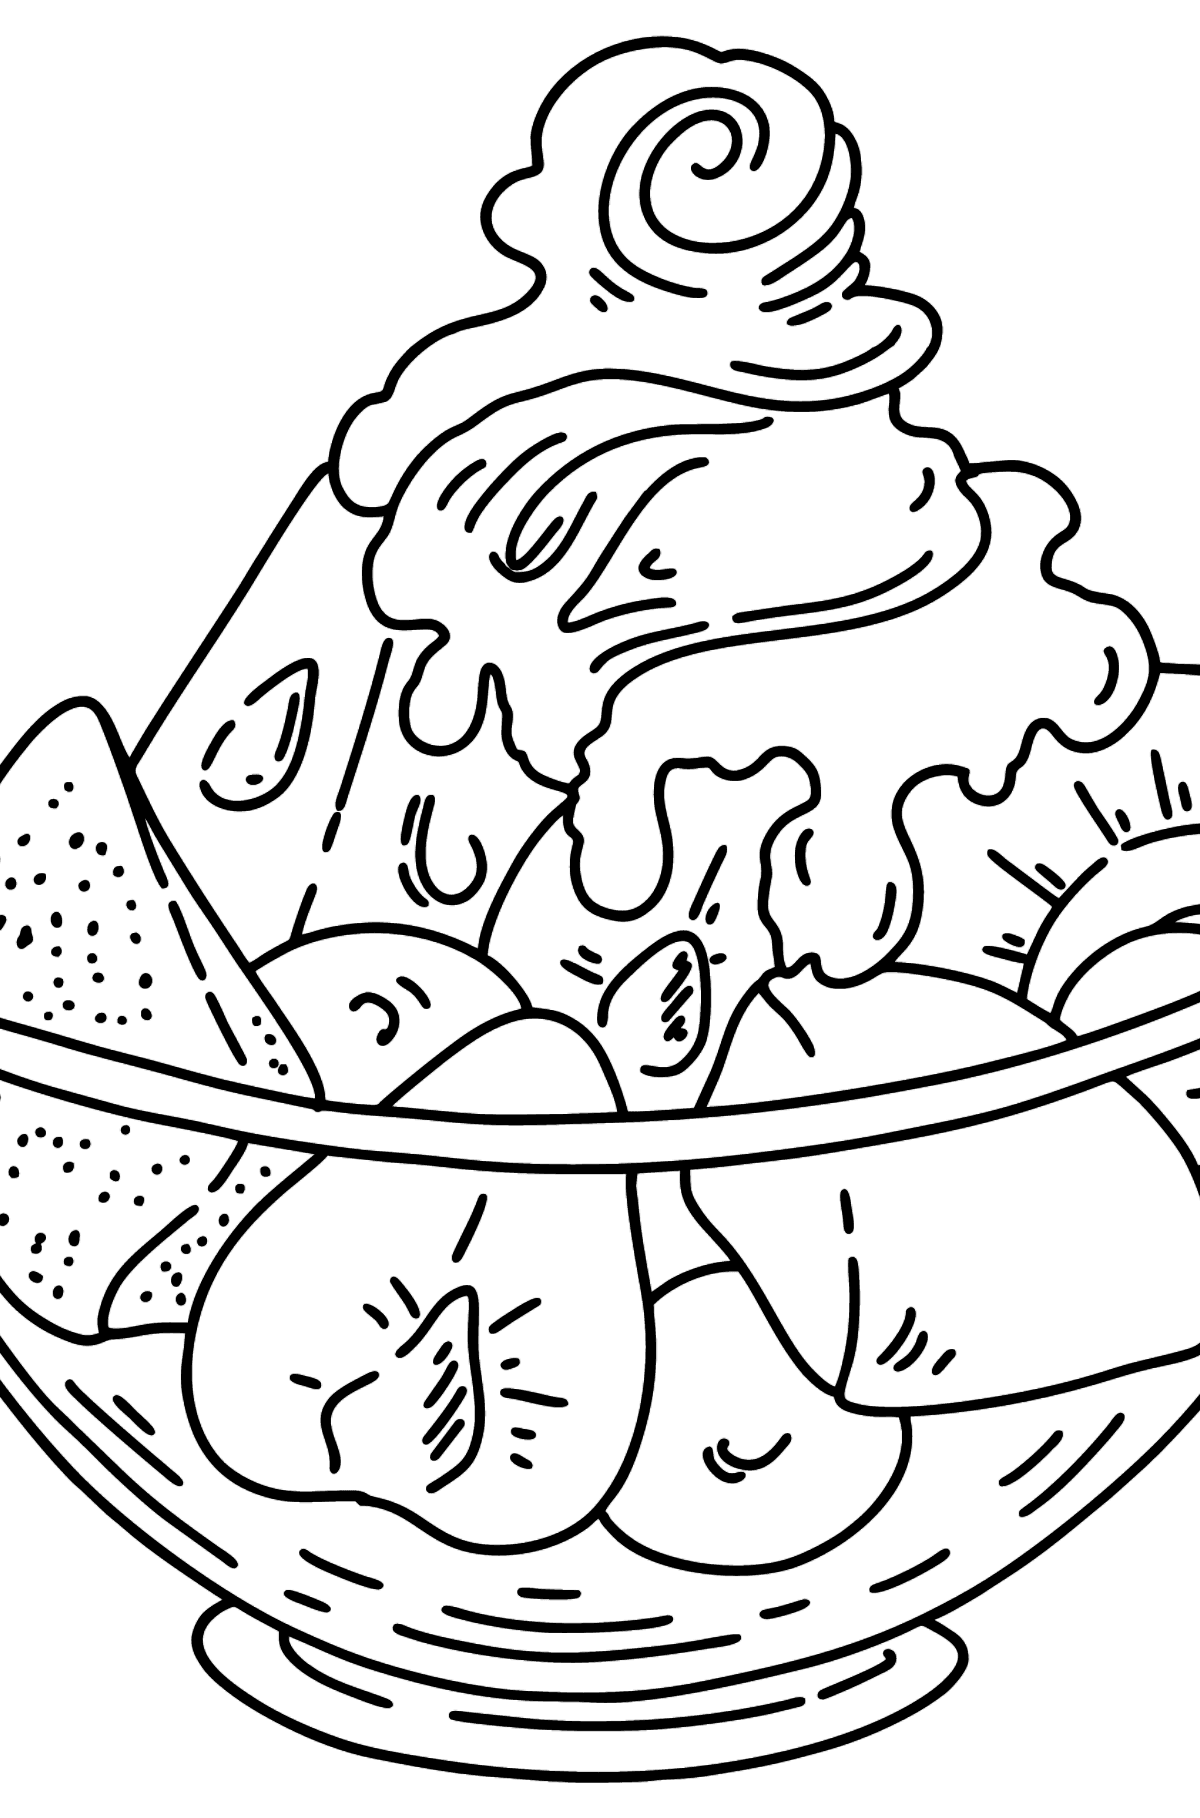 Fruit Salad coloring page - Coloring Pages for Kids